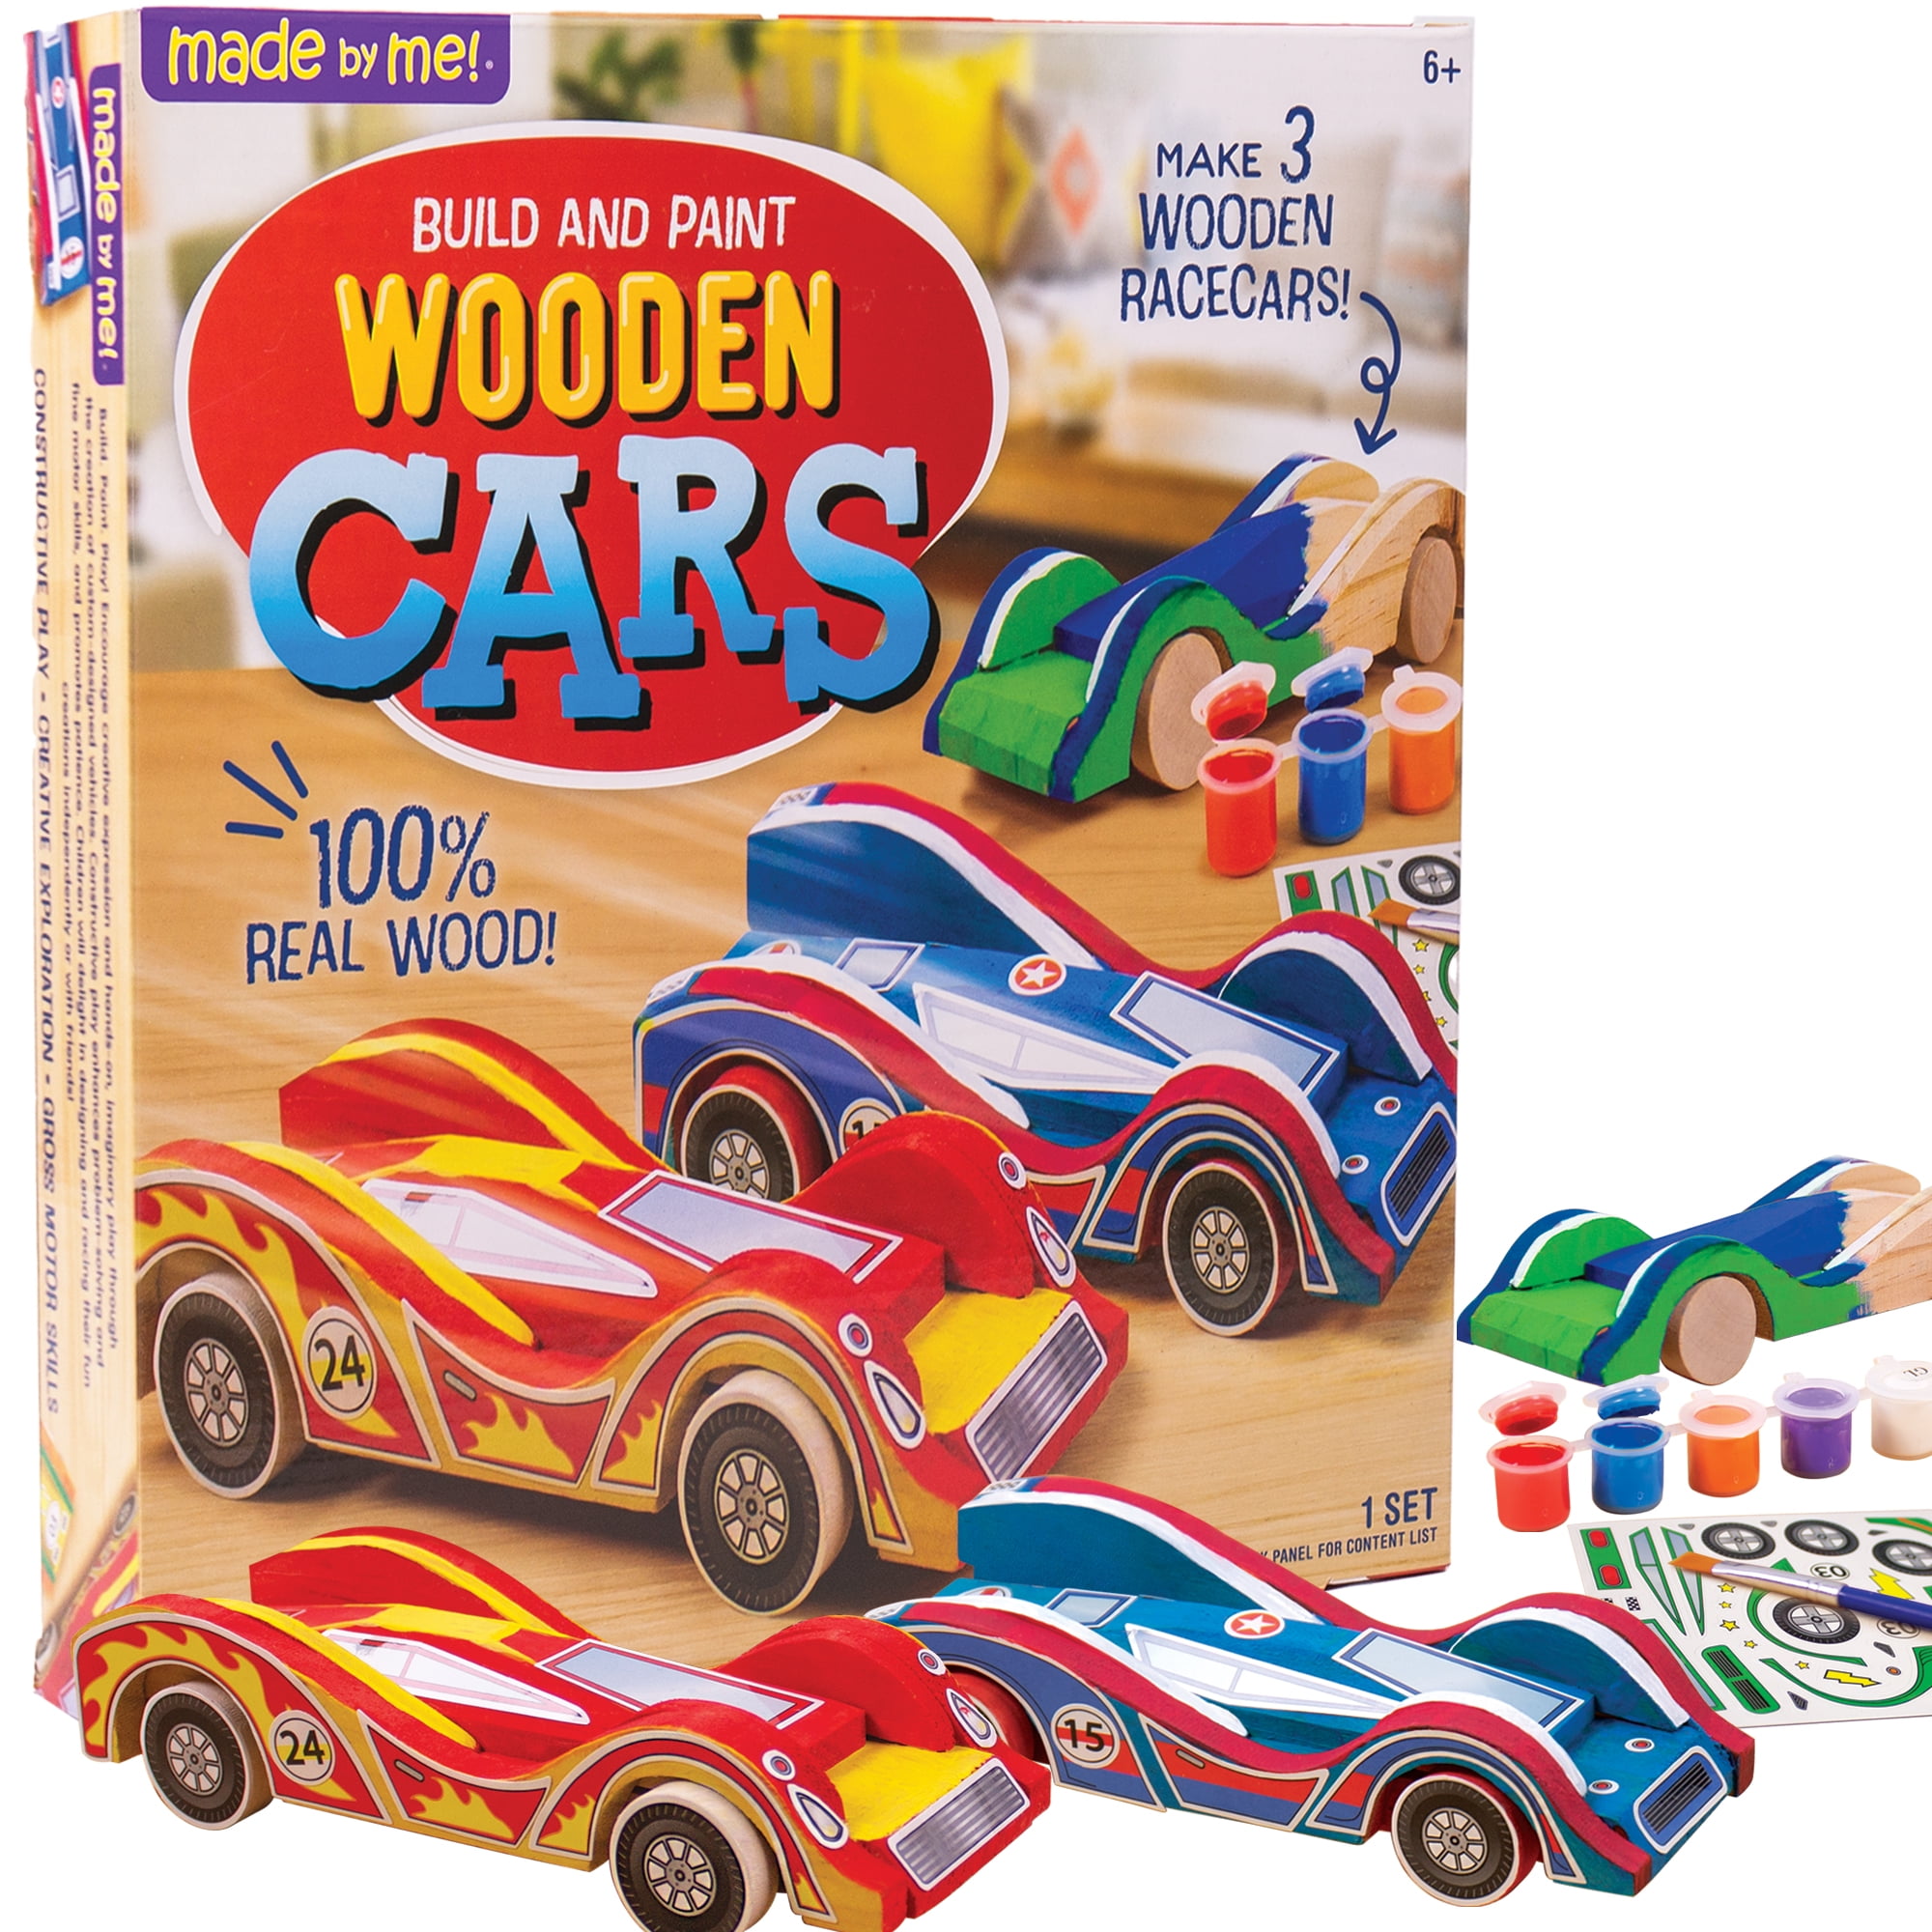 Easy To Assemble & Paint 3 Race Cars DIY Wood Craft Kit Made By Me Build & Paint Your Own Wooden Cars by Horizon Group Usa Multicolored Renewed 